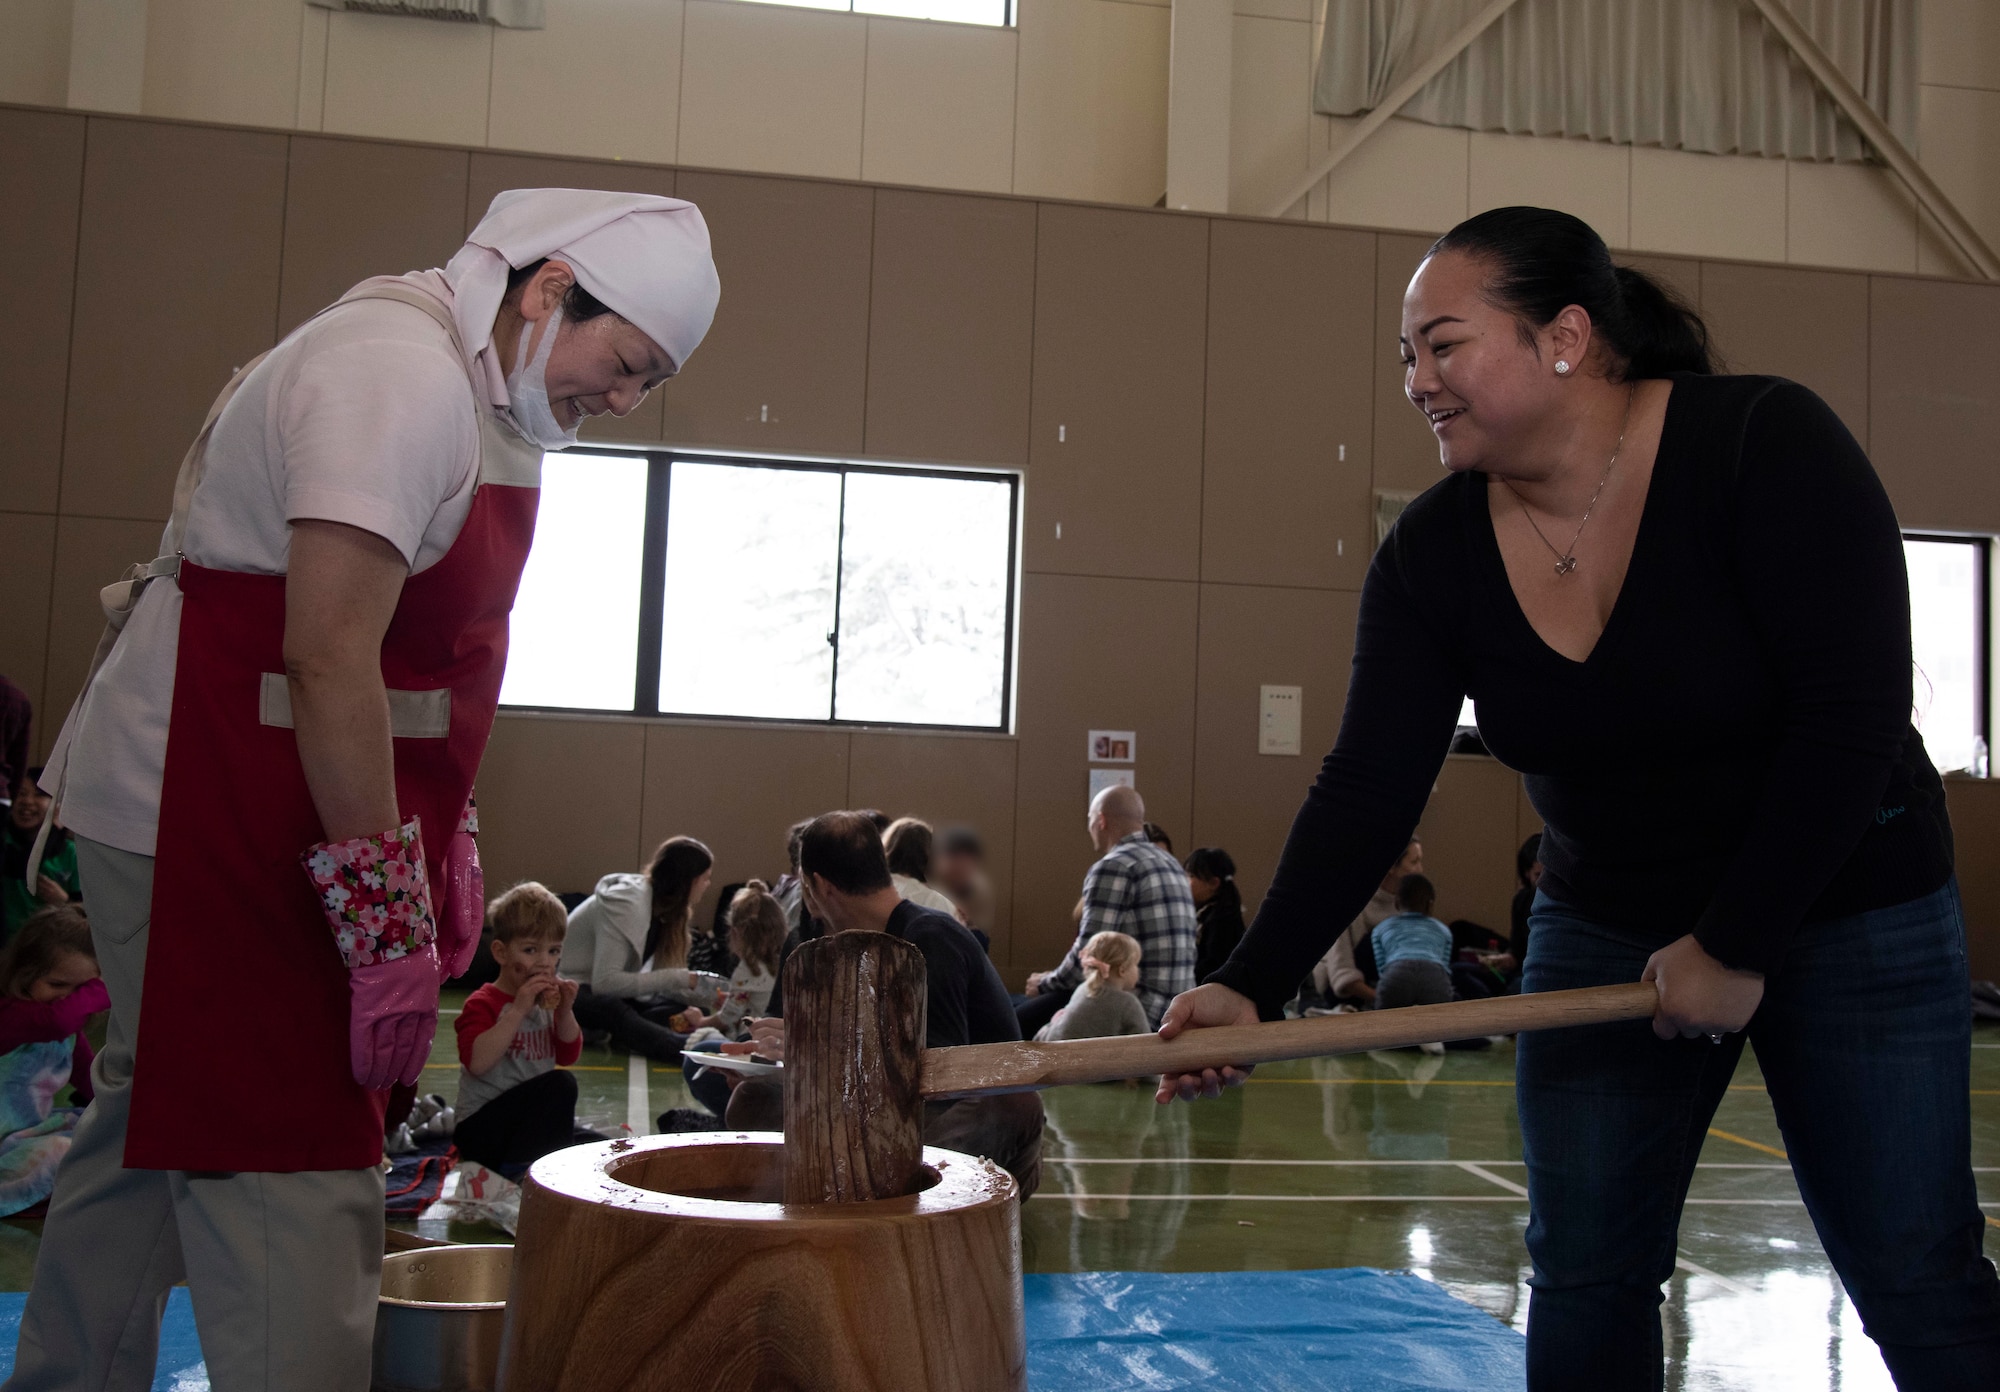 A Hirosaki Ai-Sei-En chef, left, and U.S. Air Force Tech. Sgt. Cherylin Santos, a 35th Operations Group command support staff section chief, pounds mochi during a Hirosaki Ai-Sei-En orphanage visit at Hirosaki, Japan, Dec. 8, 2018. The 35th Operations Group coordinates annually with the orphanage to provide food, games, presents and holiday cheer to the children. (U.S. Air Force photo by Branden Yamada)